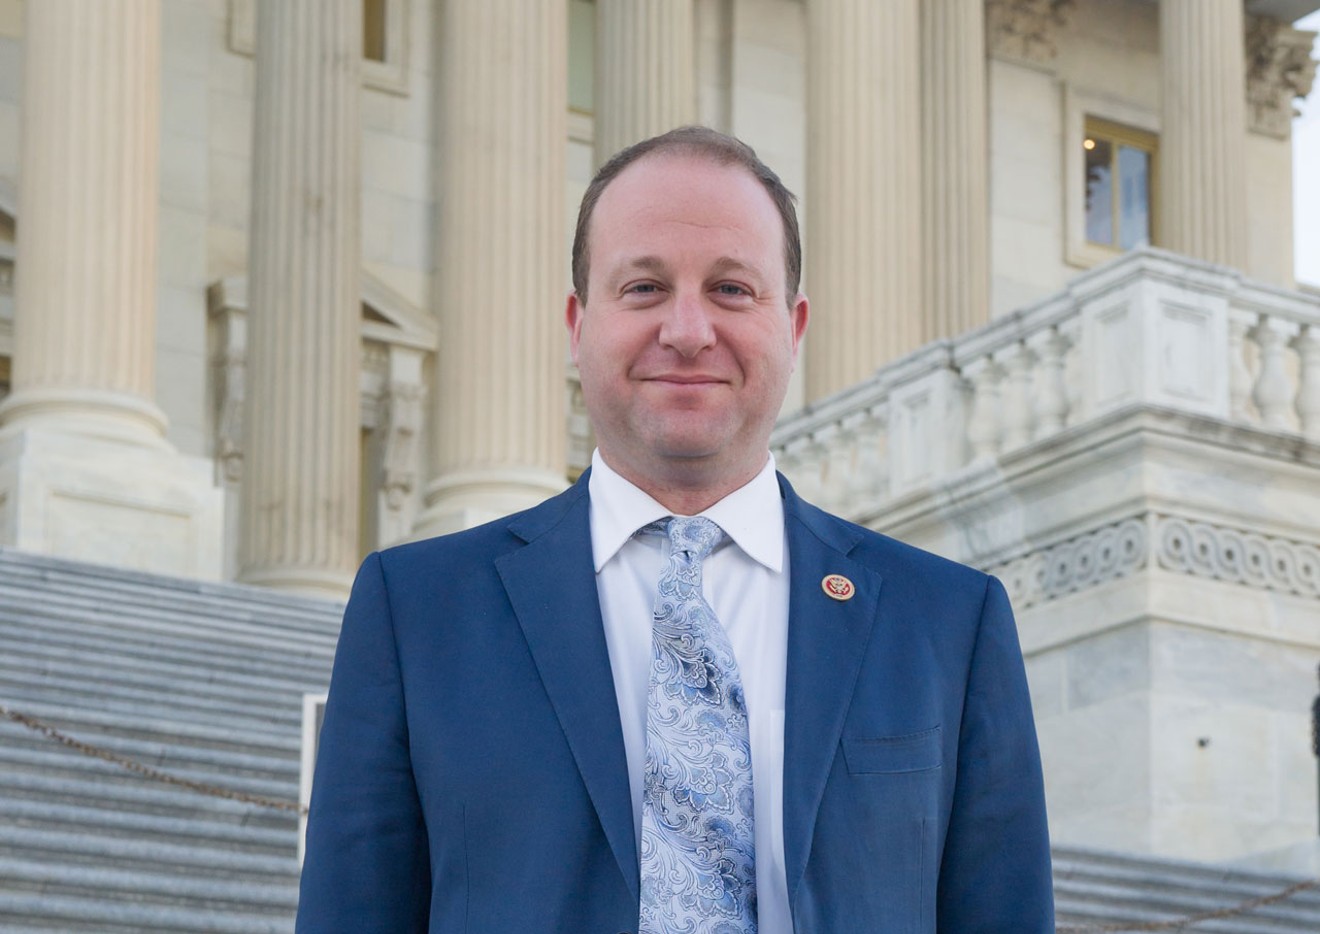 Jared Polis is moving to the State Capitol from Congress.